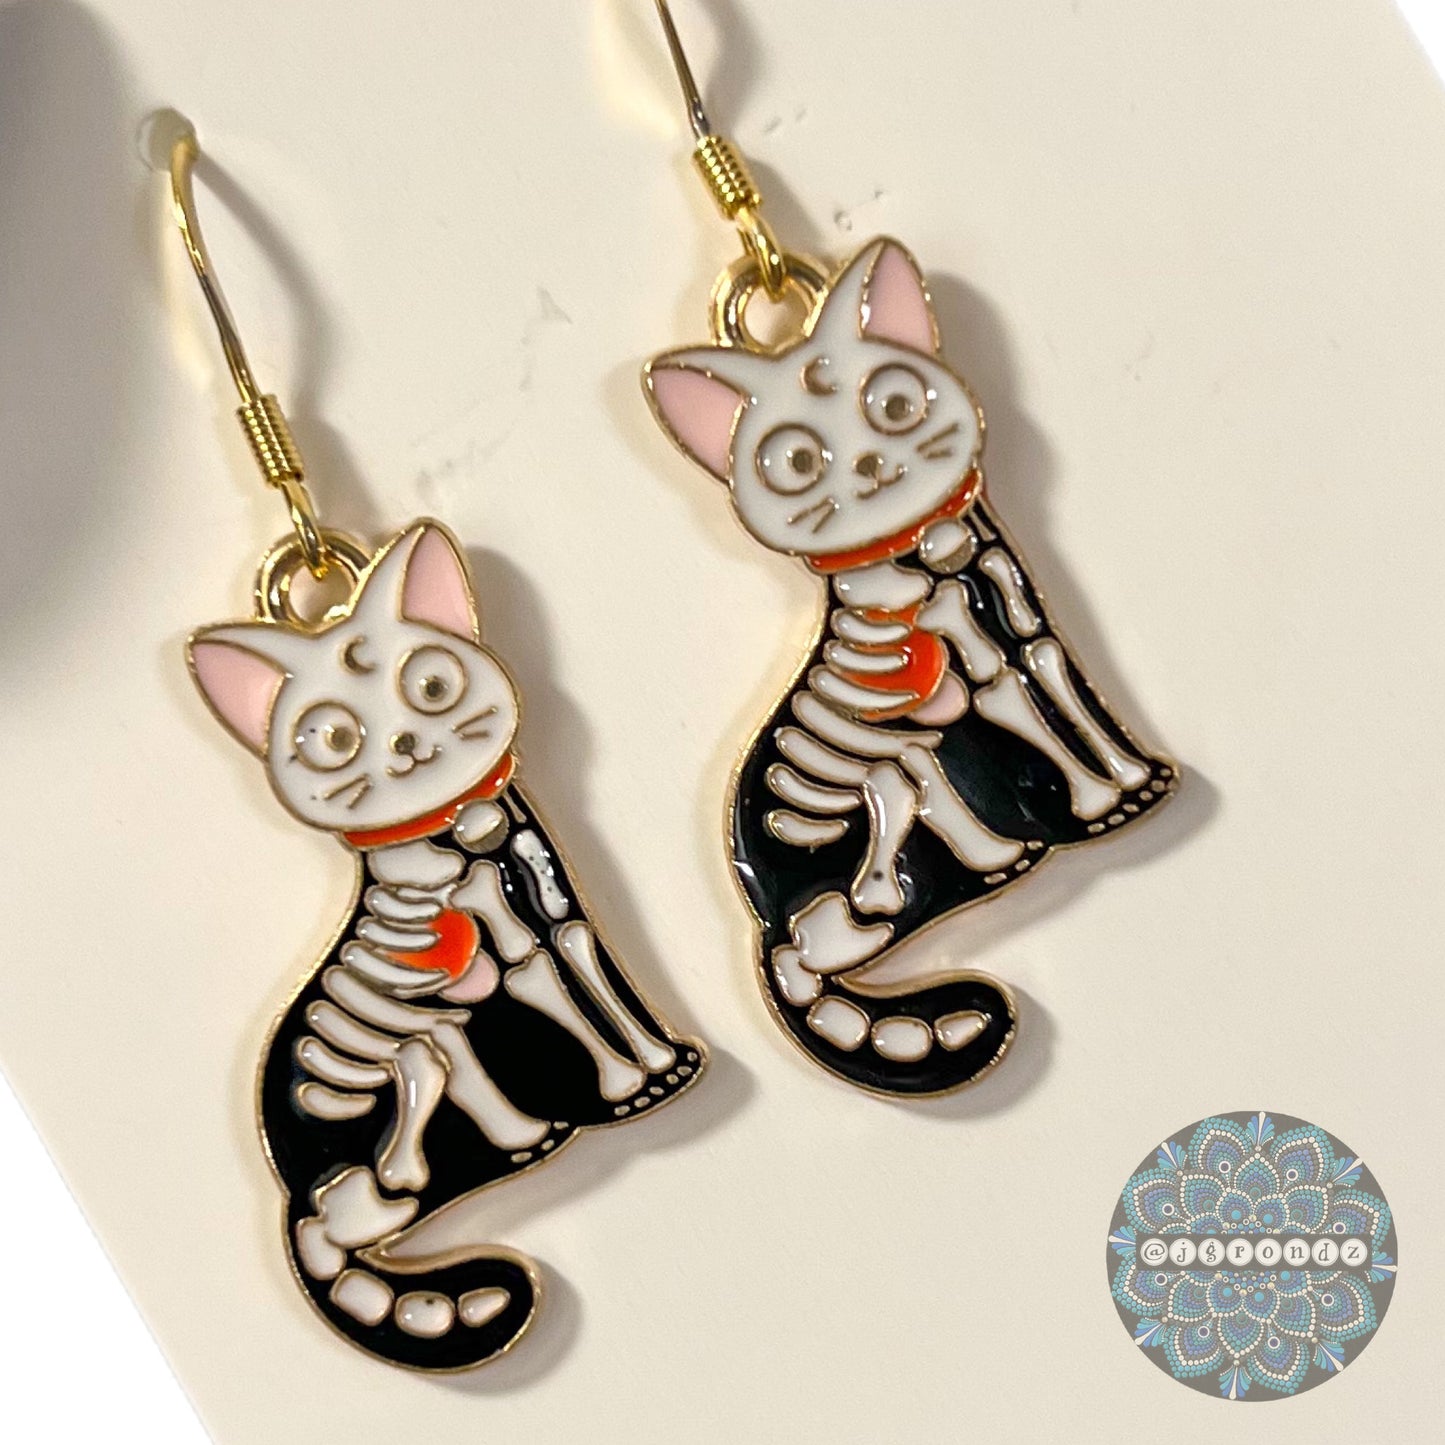 Skeleton Cat Kitty Earrings with 18k gold plated Fish Hook Ear Wire for Halloween